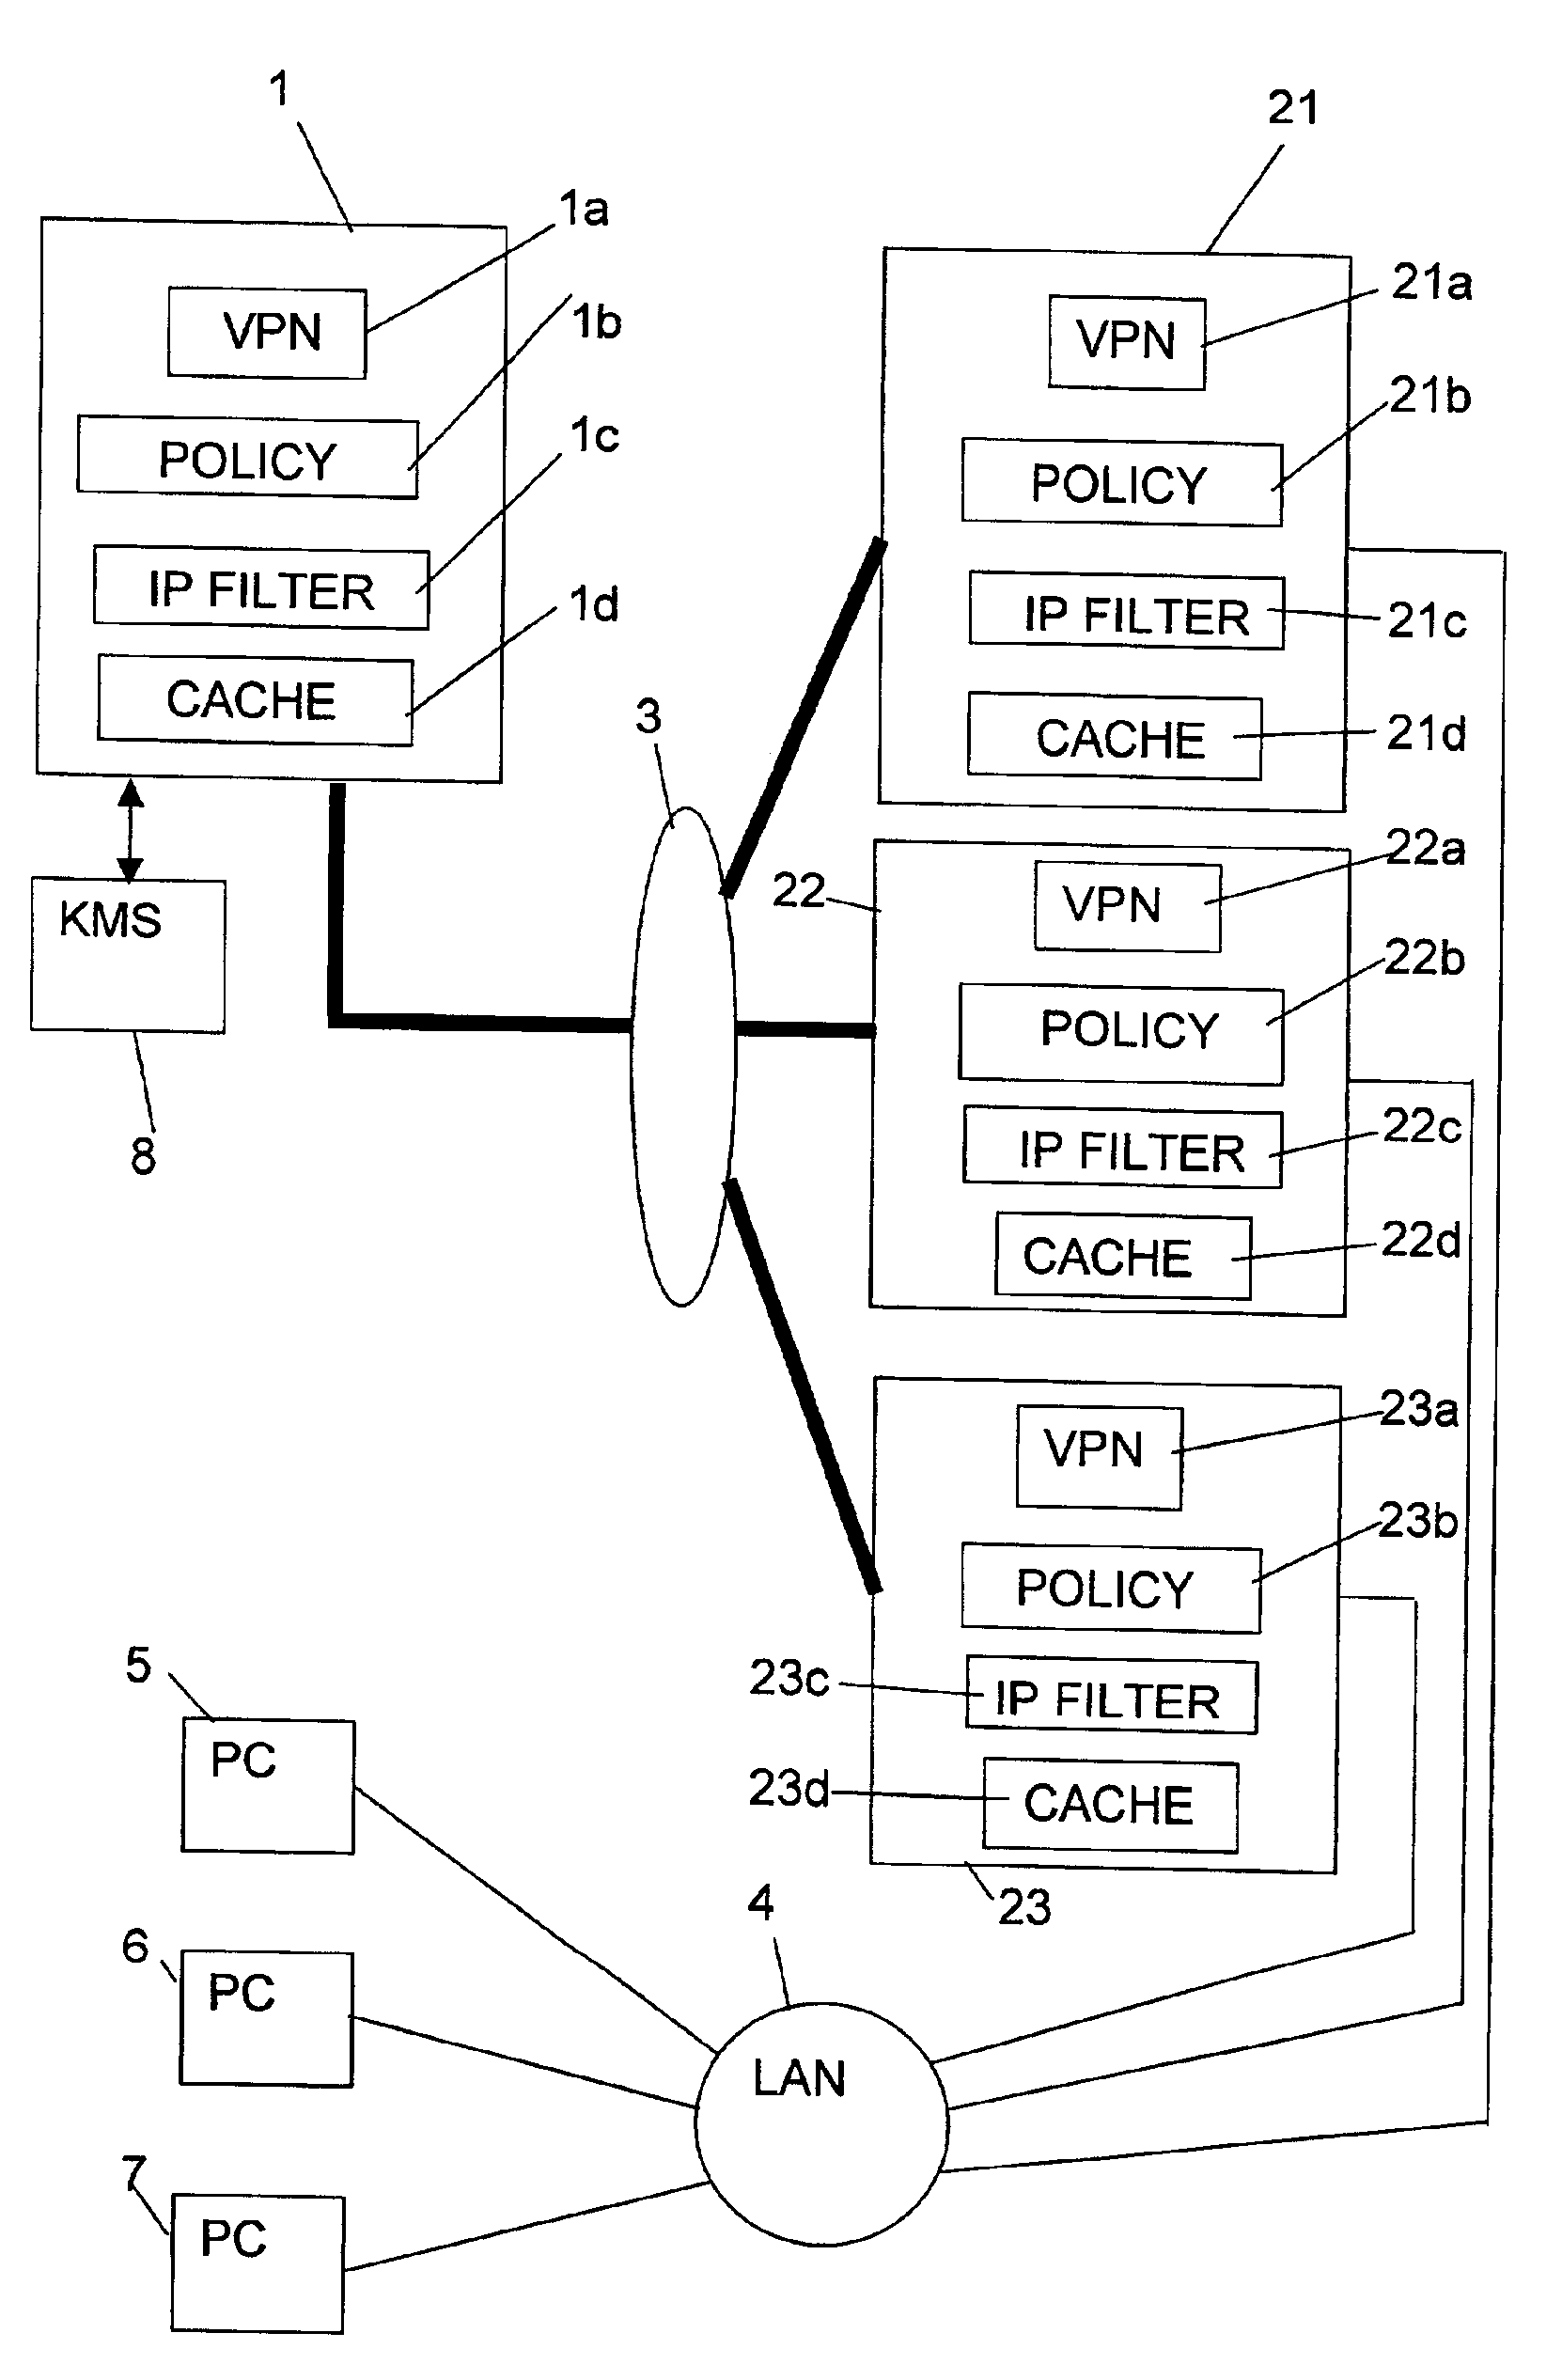 Computer systems, in particular virtual private networks